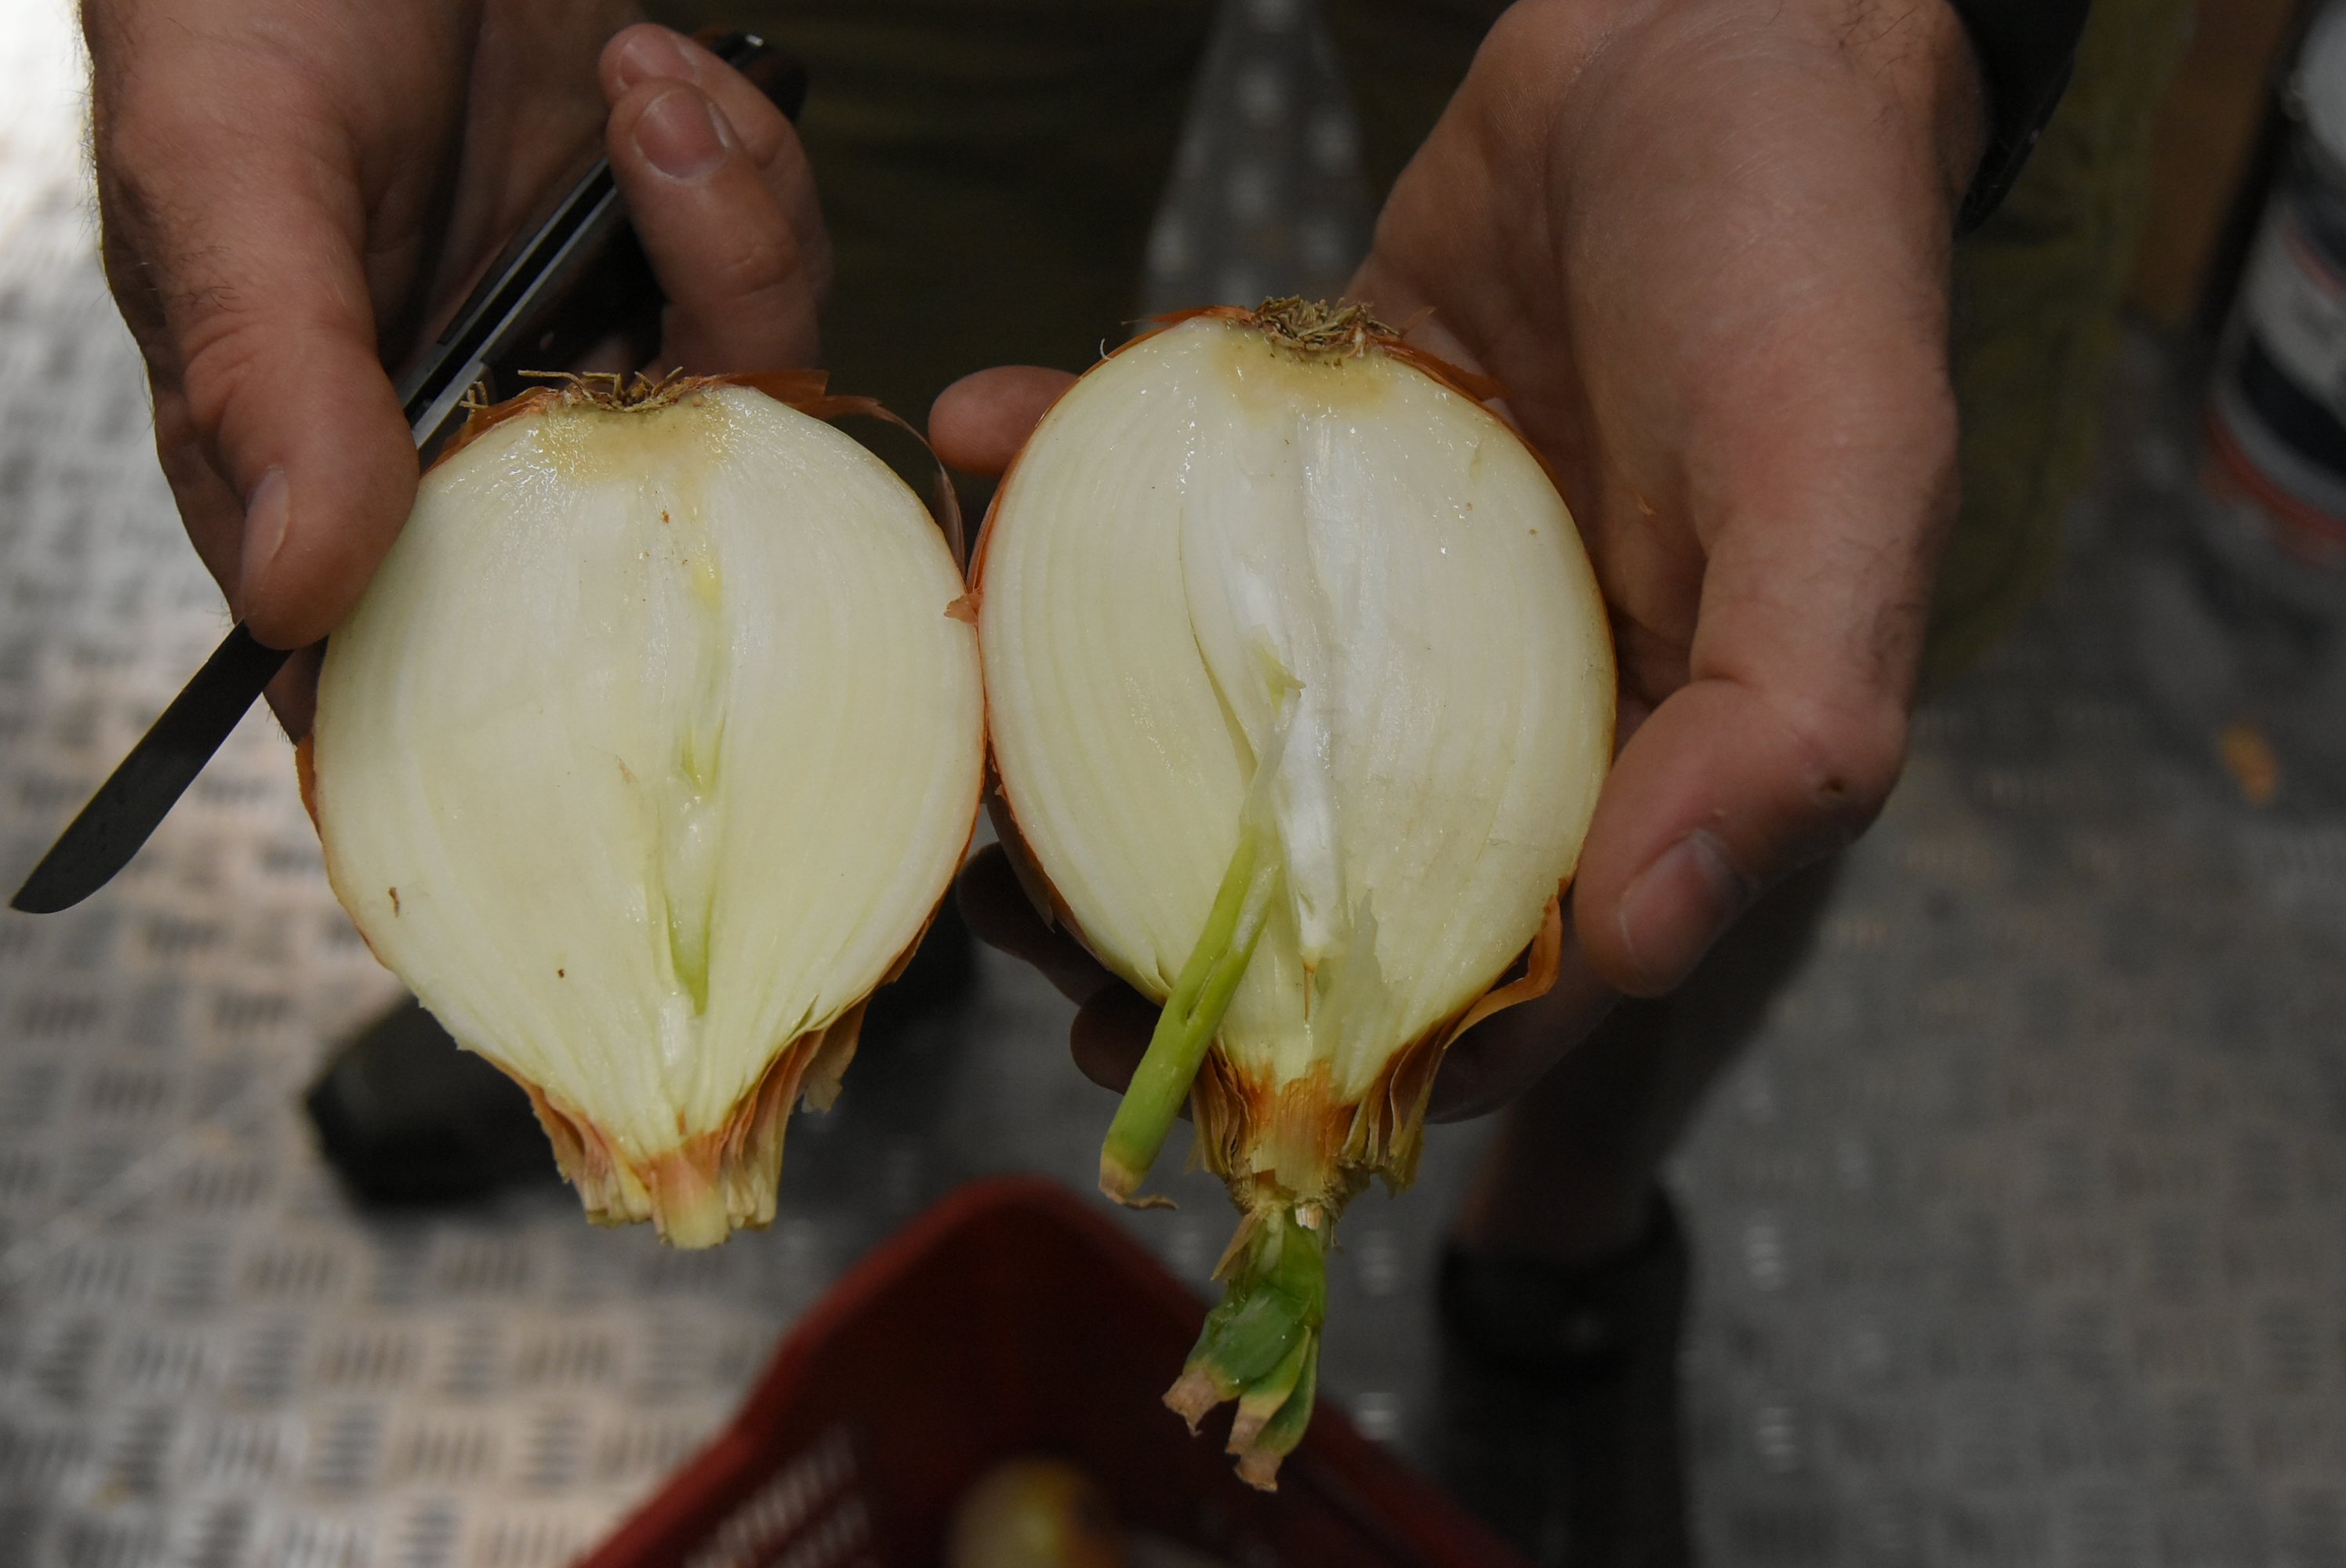 How can you ensure desired onion quality and consistency?